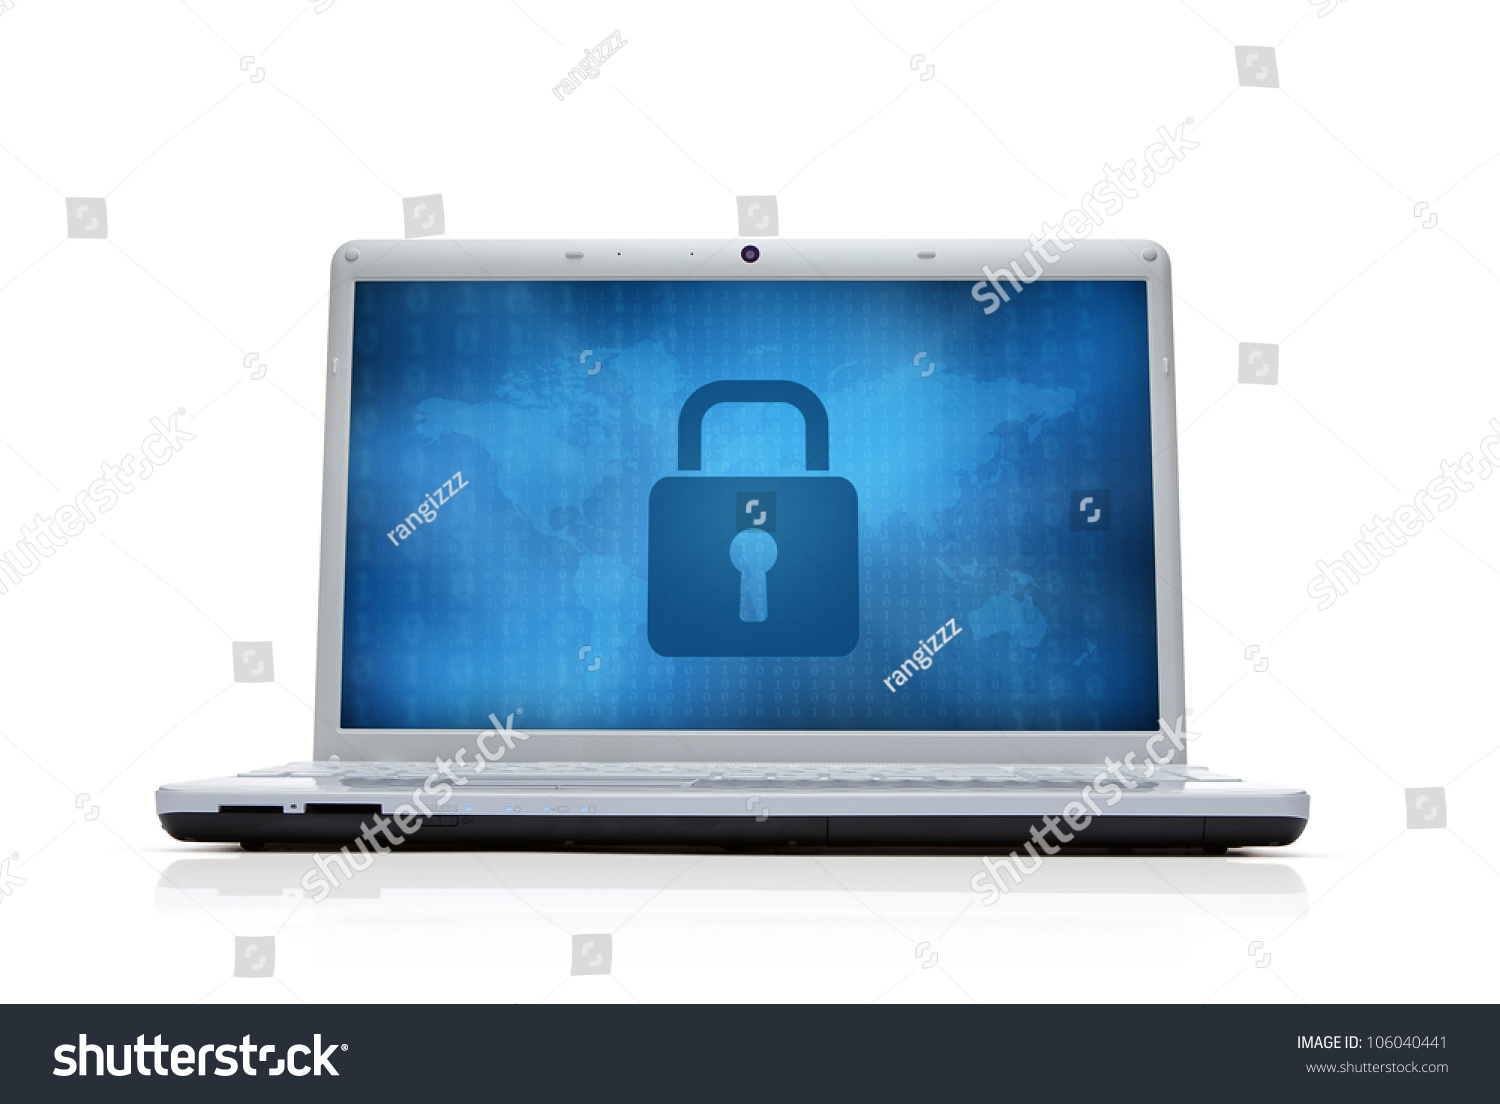 Internet security lock at the computer monitor isolated on white background #106040441